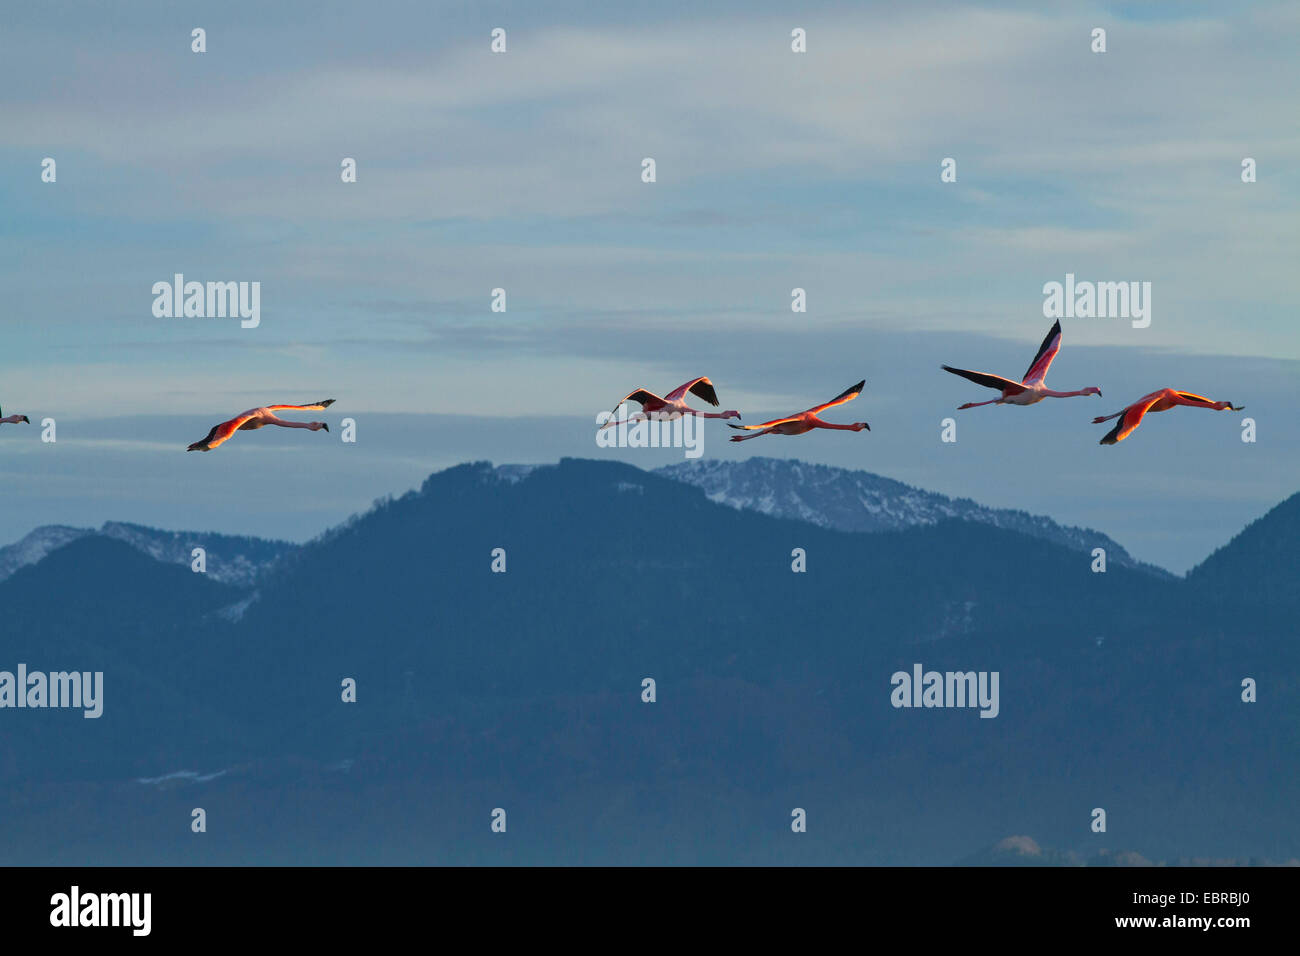 Greater flamingo, American flamingo, Caribbean Flamingo (Phoenicopterus ruber ruber), winter guest, flying in front of alpine panorama, Germany, Bavaria, Lake Chiemsee Stock Photo